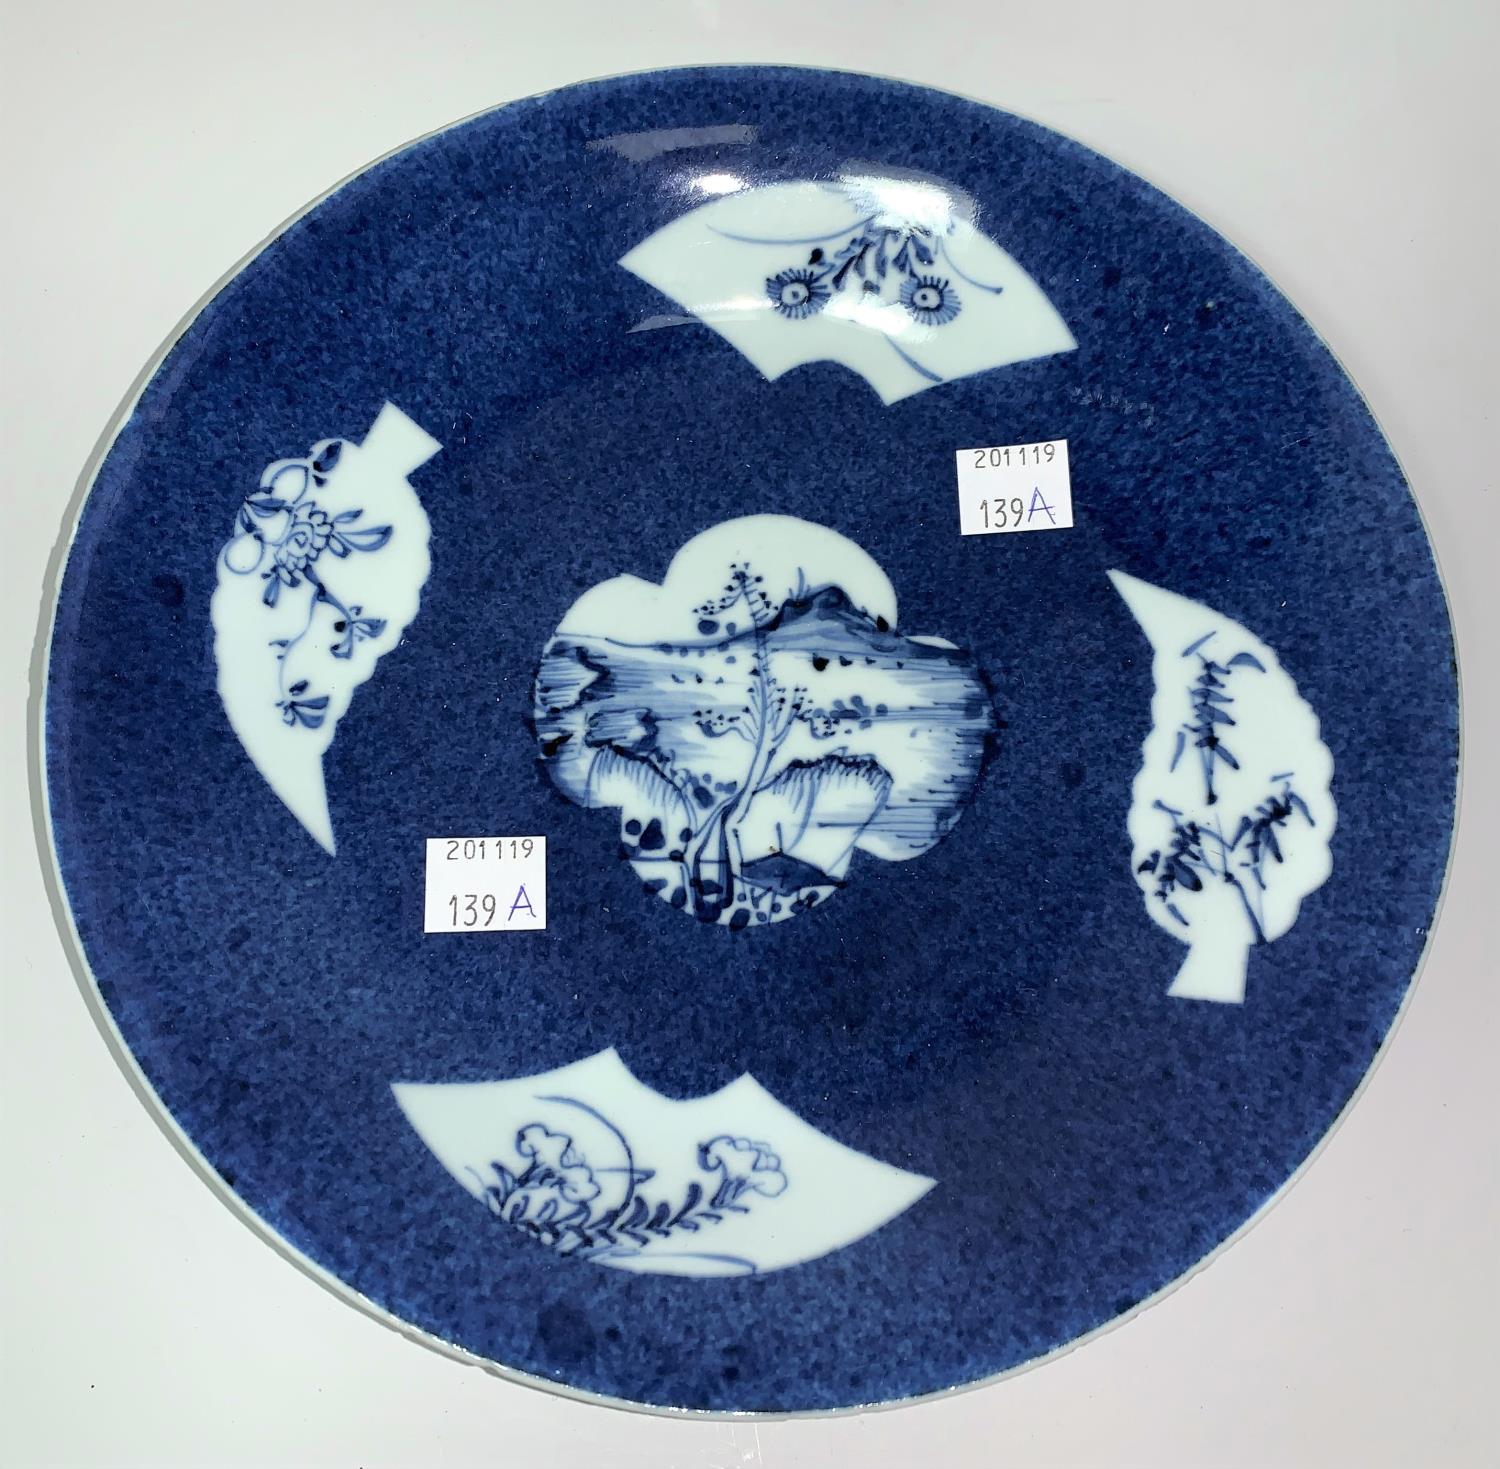 A Chinese Kiangsi blue & white shallow dish decorated with fan and leaf reserve panels against a